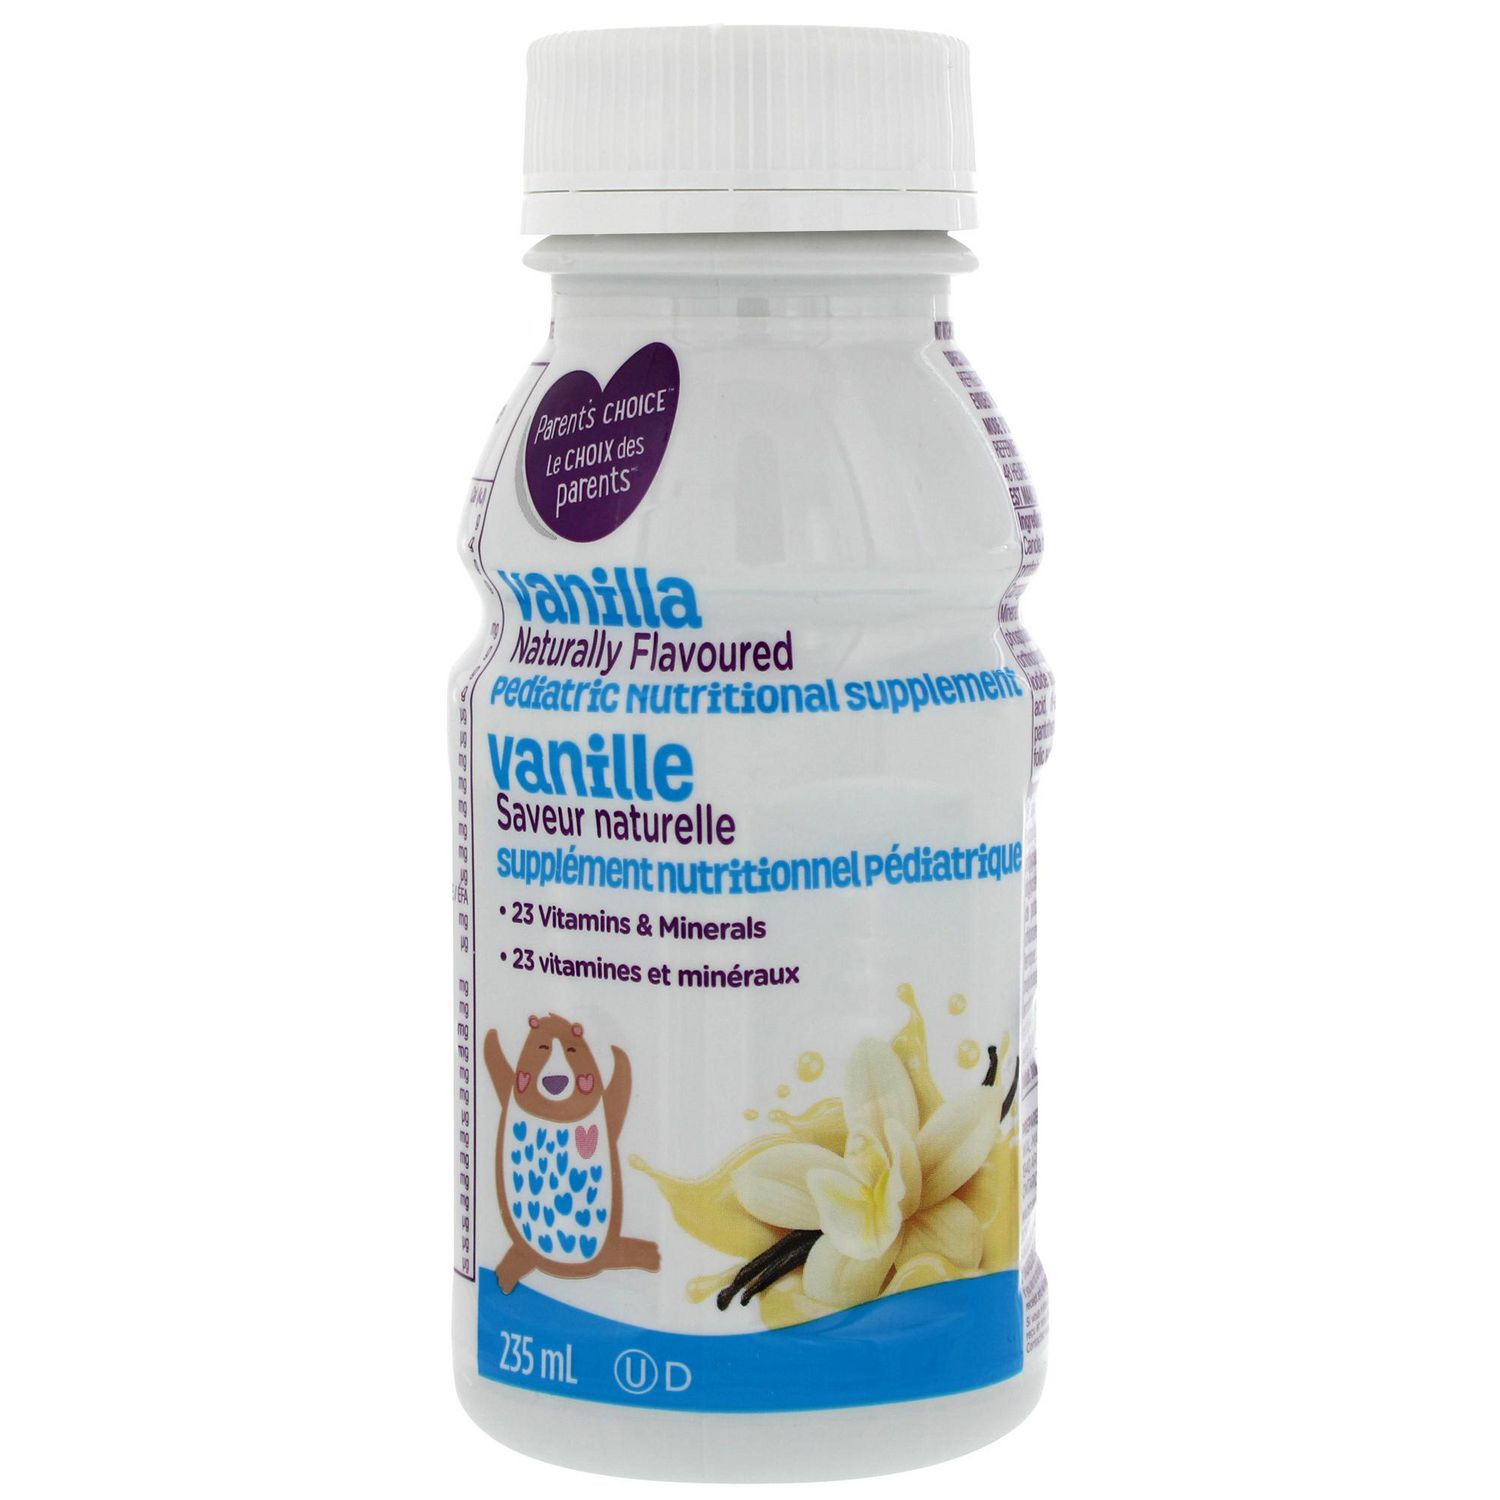 Parent's Choice Vanilla Naturally Flavoured Pediatric Nutritional  Supplement 